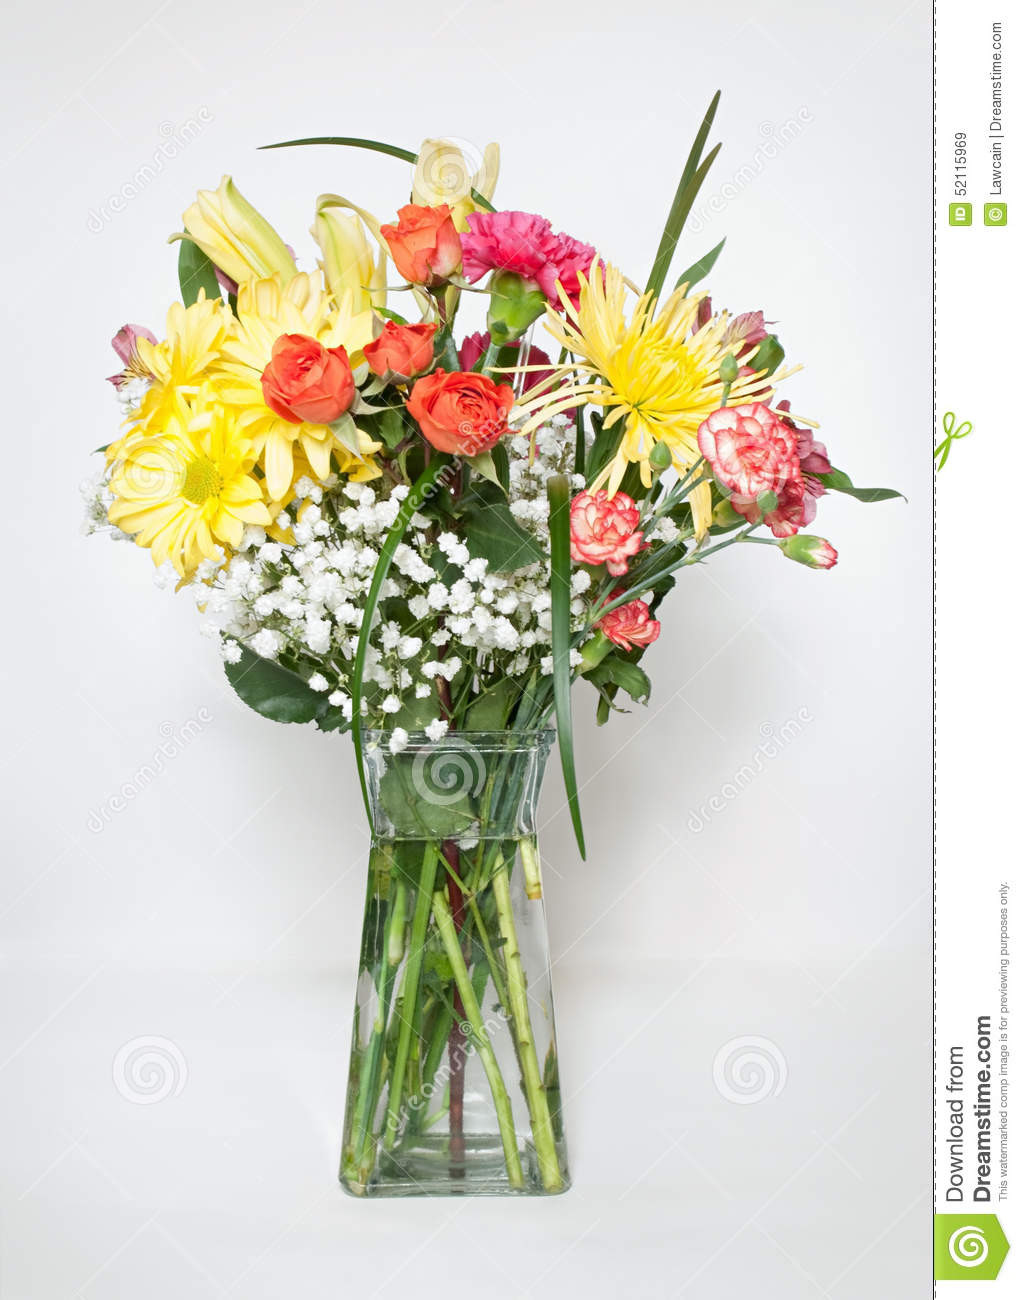 29 Fabulous Artificial Flower Arrangements In Glass Vases 2024 free download artificial flower arrangements in glass vases of fresh spring bouquet stock image image of blossom background for fresh spring flower arrangement in clear glass vase on white background